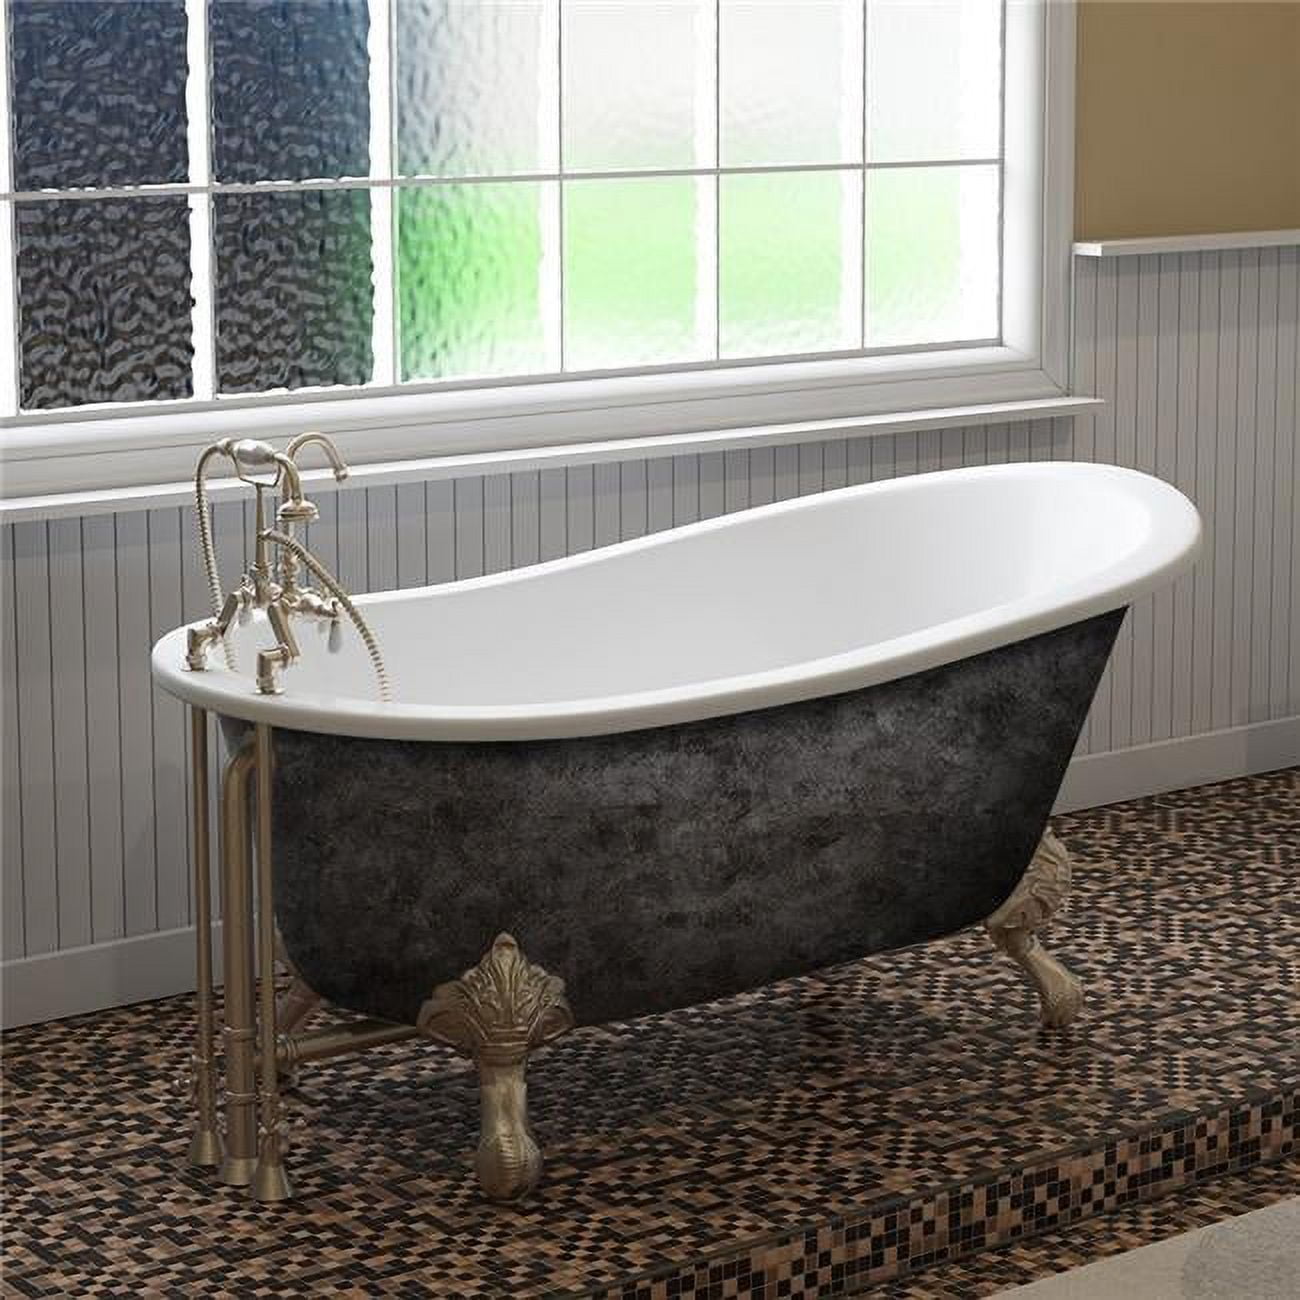 St61-dh-bn-sp 61 X 30 In. Scorched Platinum Cast Iron Slipper Bathtub With 7 In. Deck Mount Faucet Holes & Brushed Nickel Feet